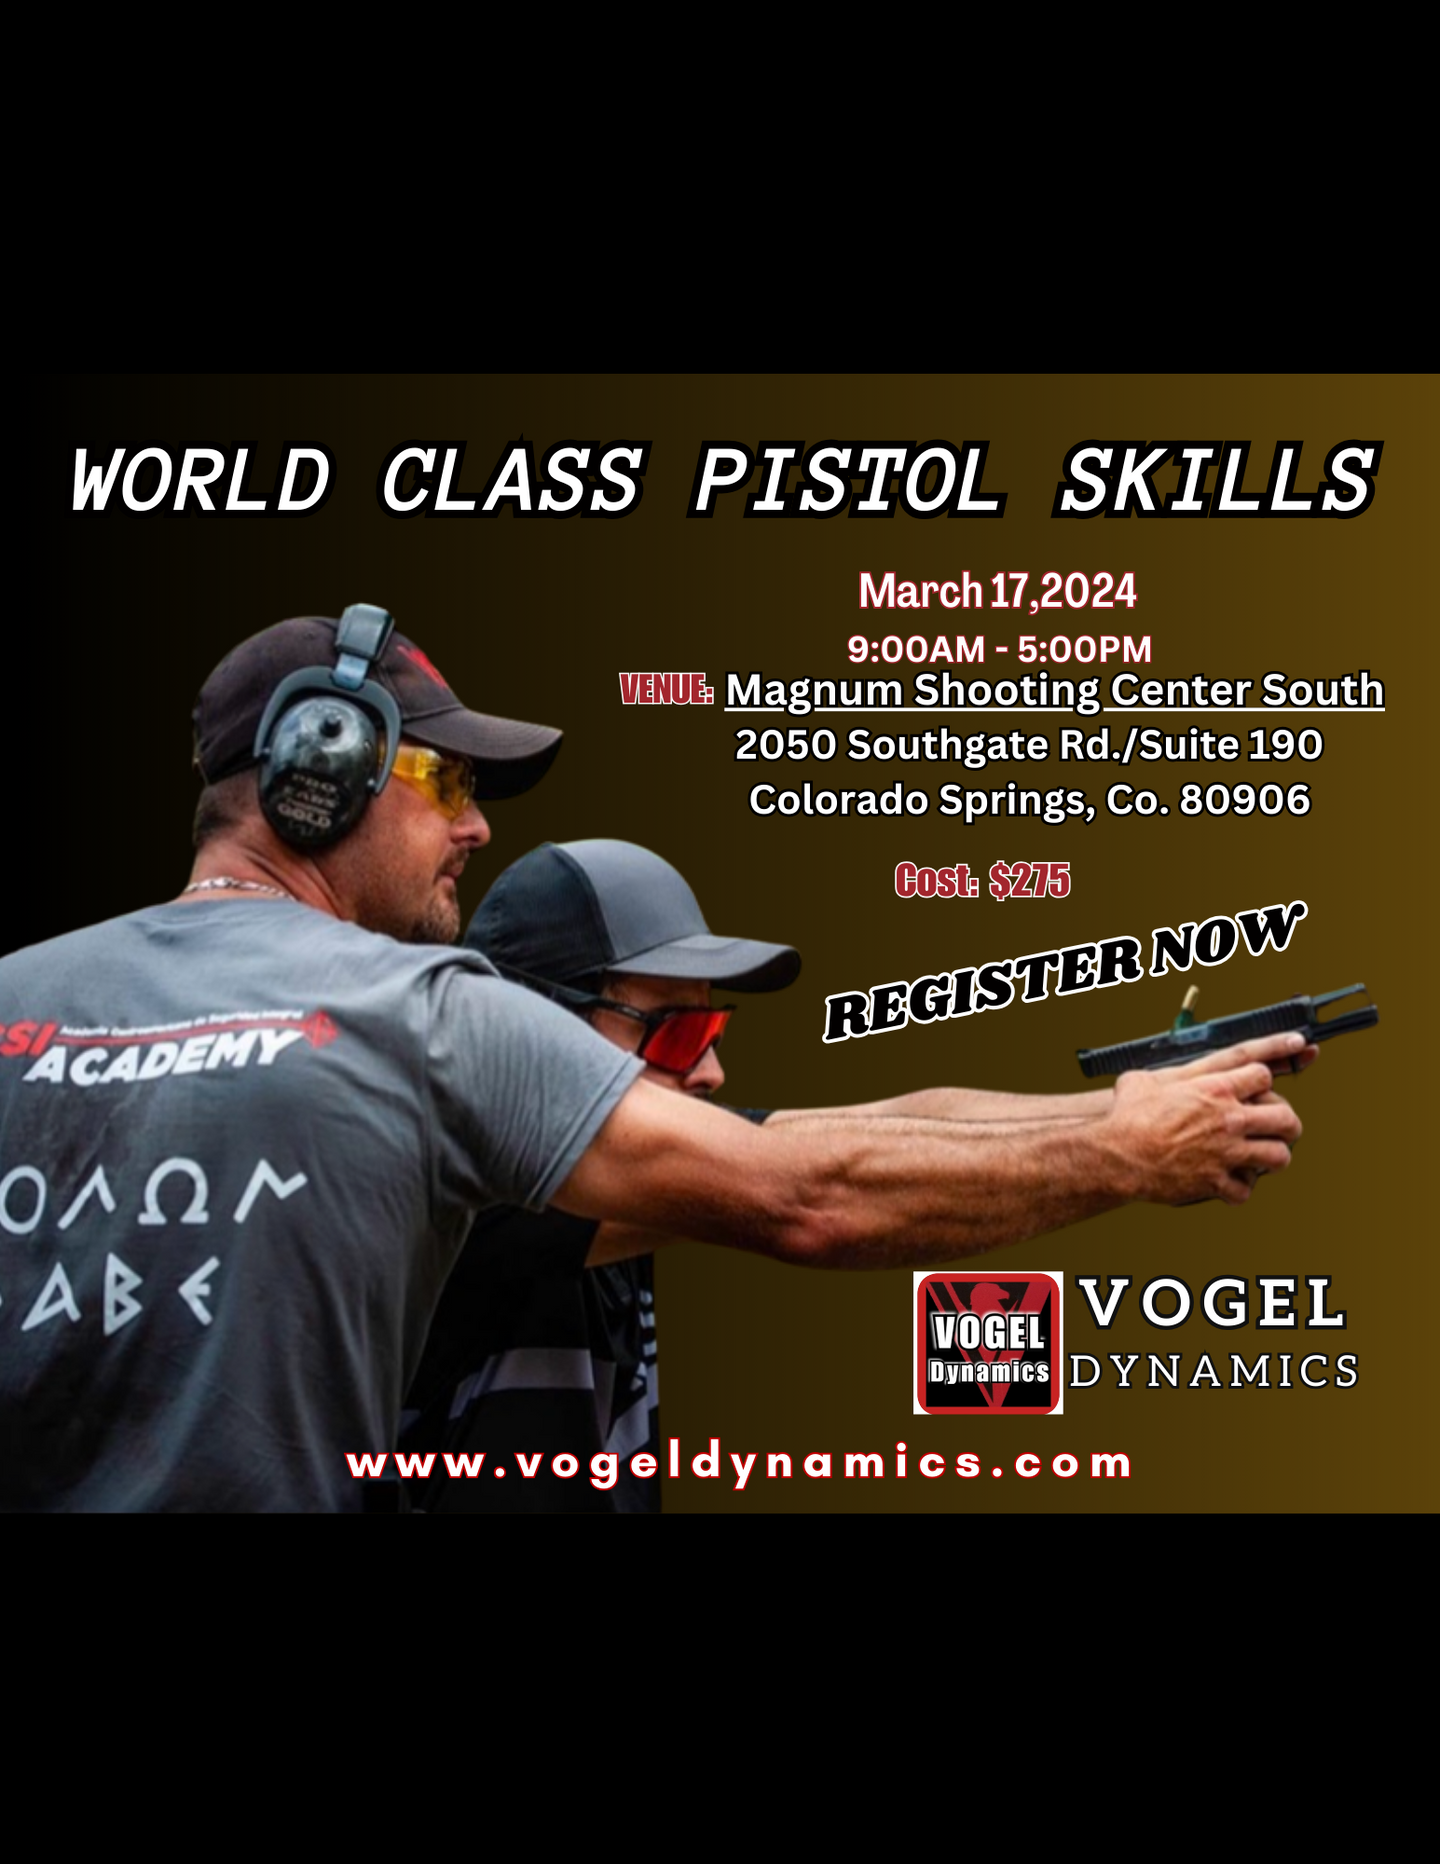 REAL SPEED PISTOL SKILLS - March 17, 2024- MAGNUM SHOOTING CENTER-Colorado Springs, Co.